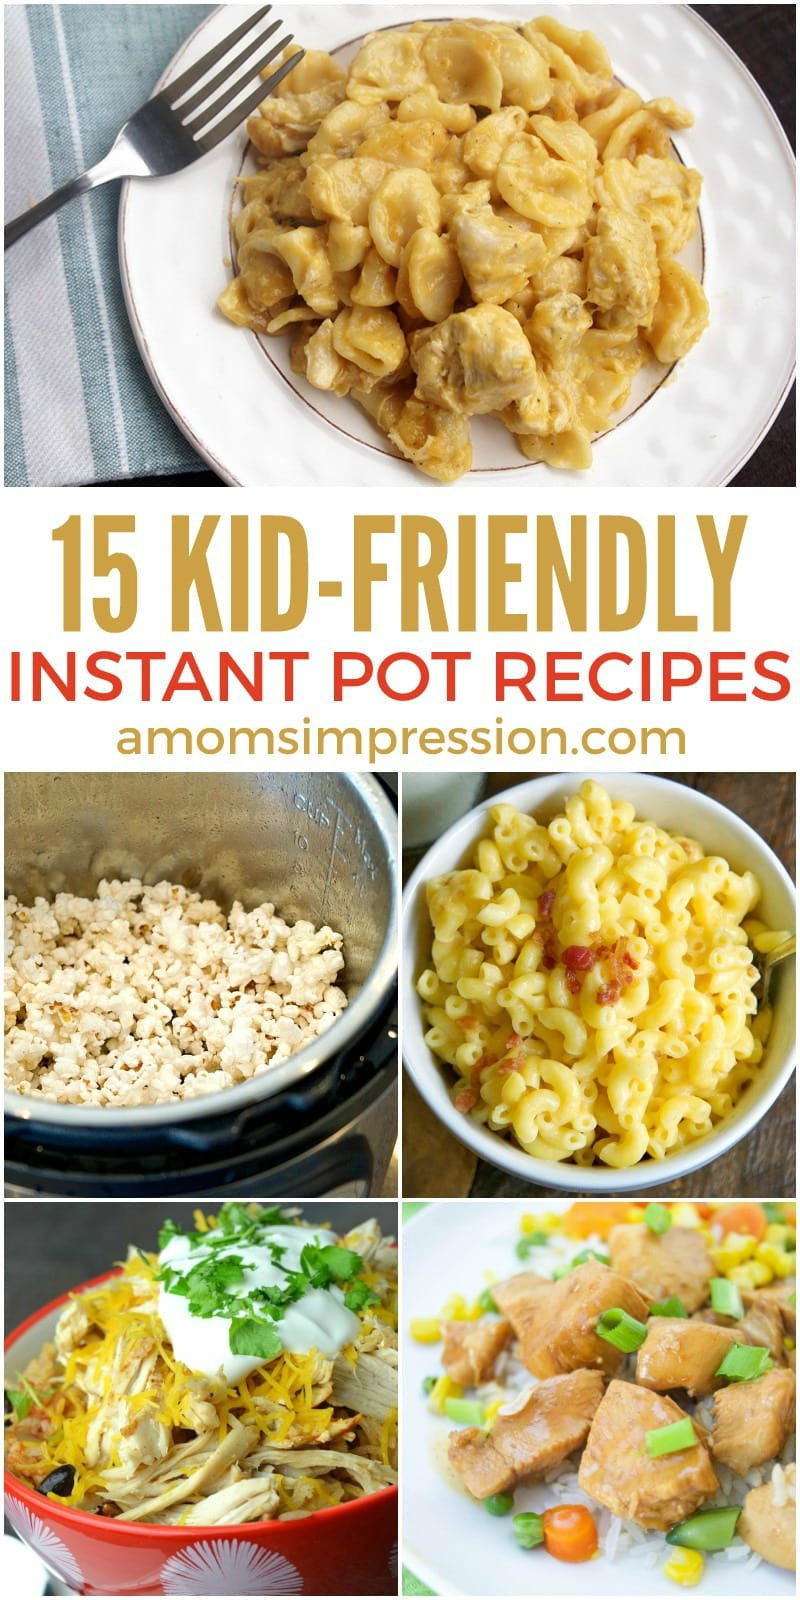 Quick And Easy Kid Friendly Dinners
 25 Quick and Easy Kid Friendly Instant Pot Recipes A Mom